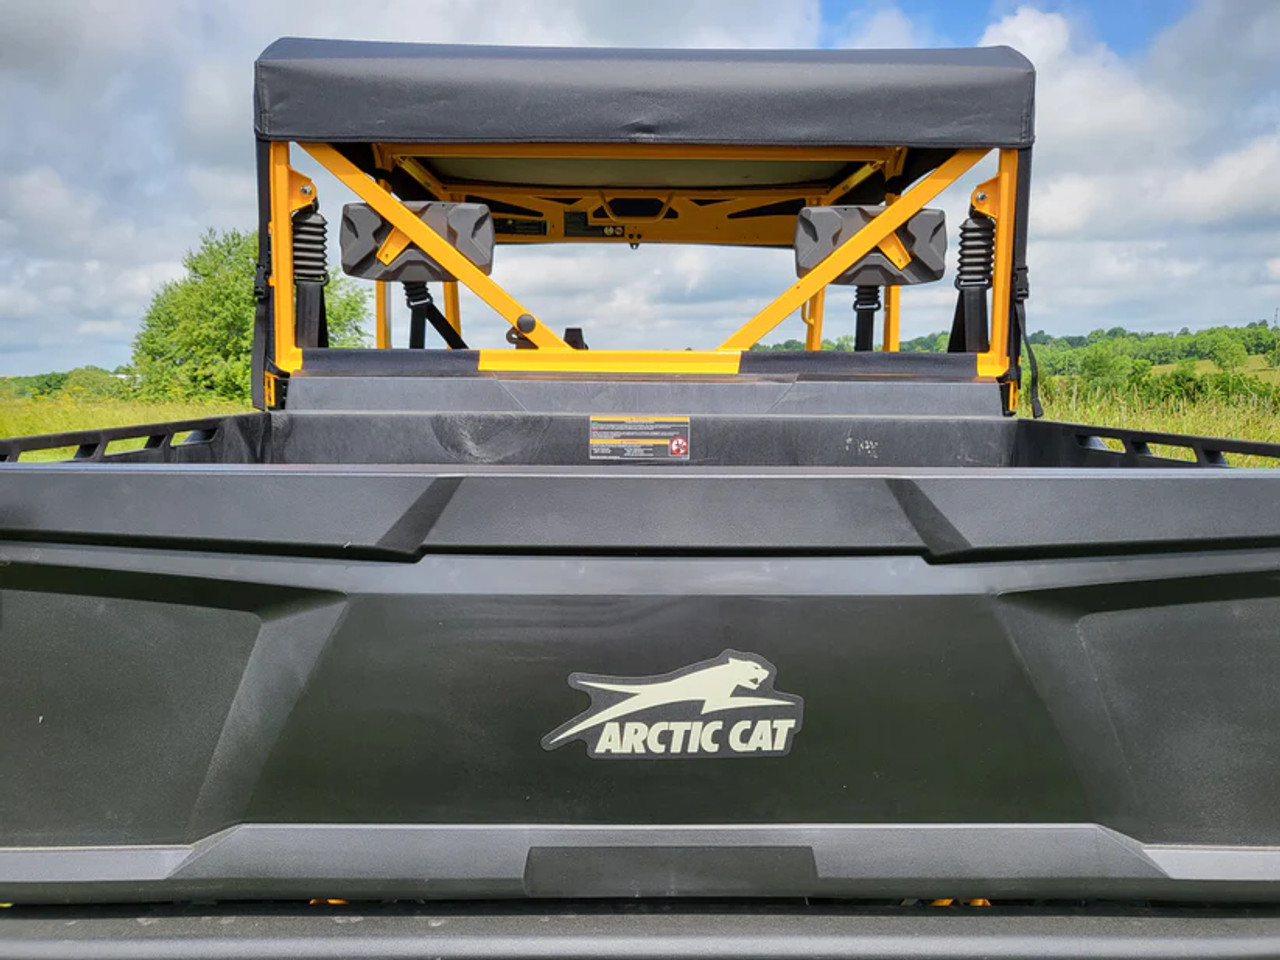 3 Star side x side Arctic Cat Prowler Pro Crew Tracker 800 SX LE Crew soft top